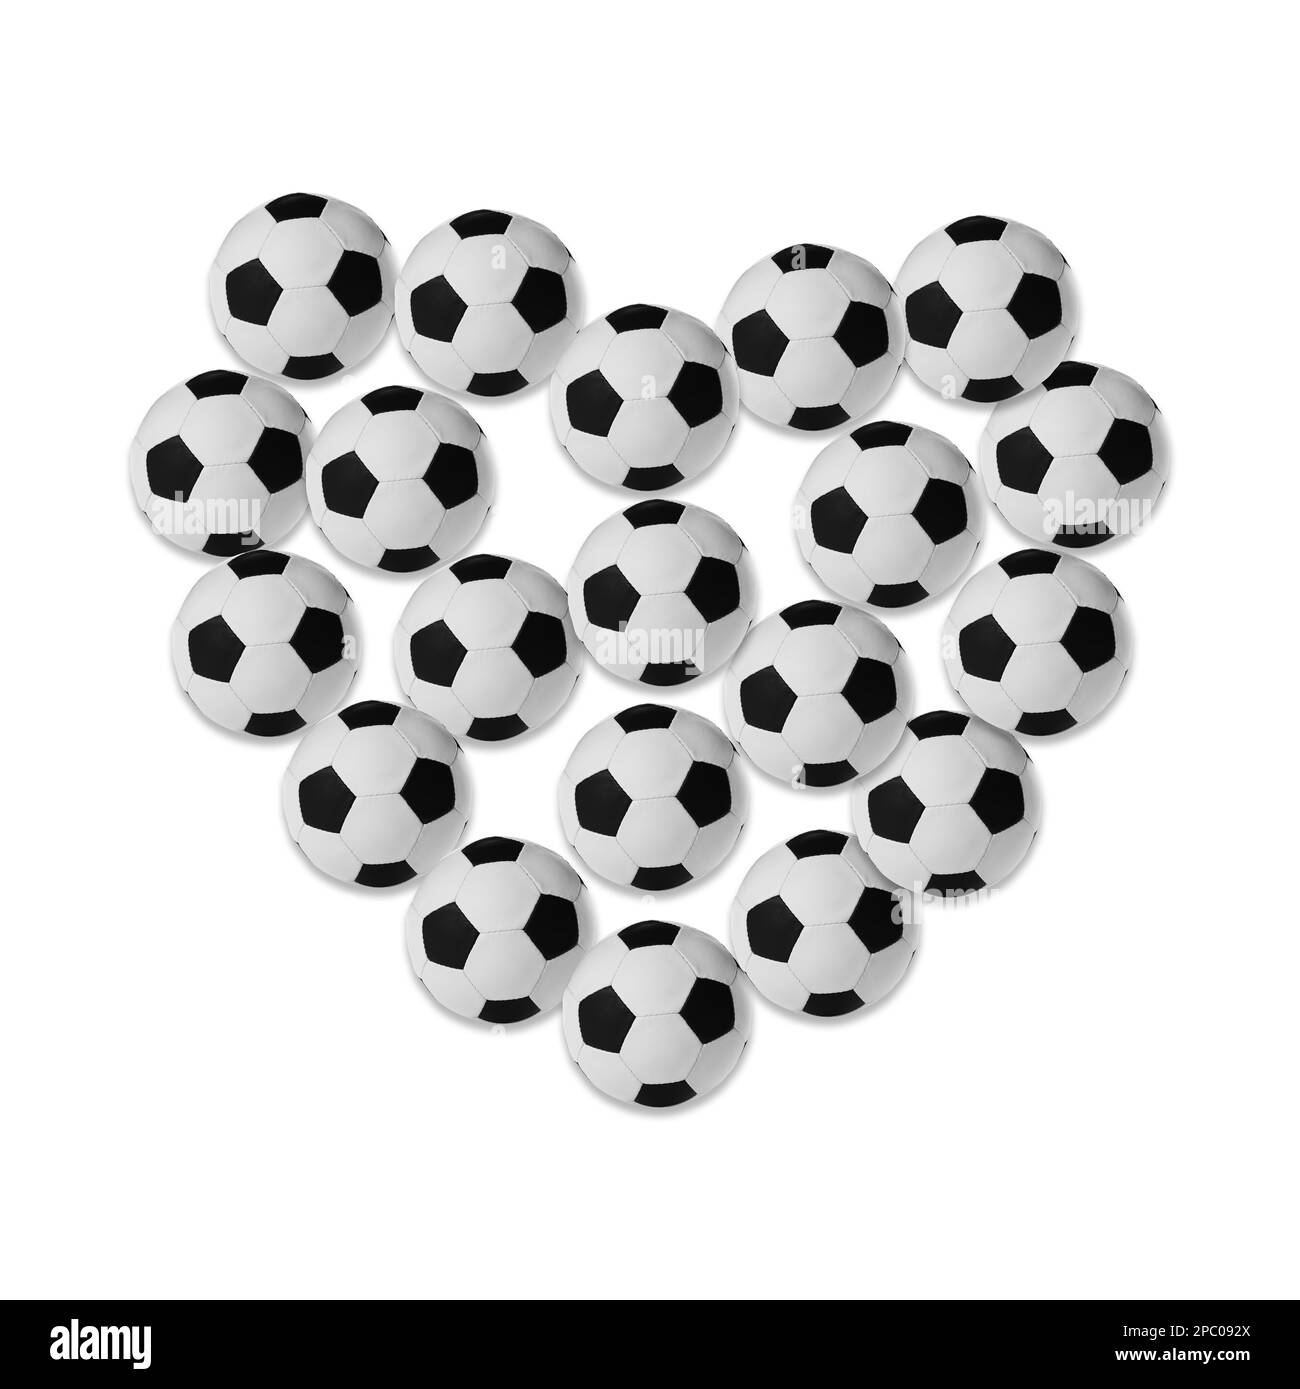 Heart made of many soccer balls on white background Stock Photo